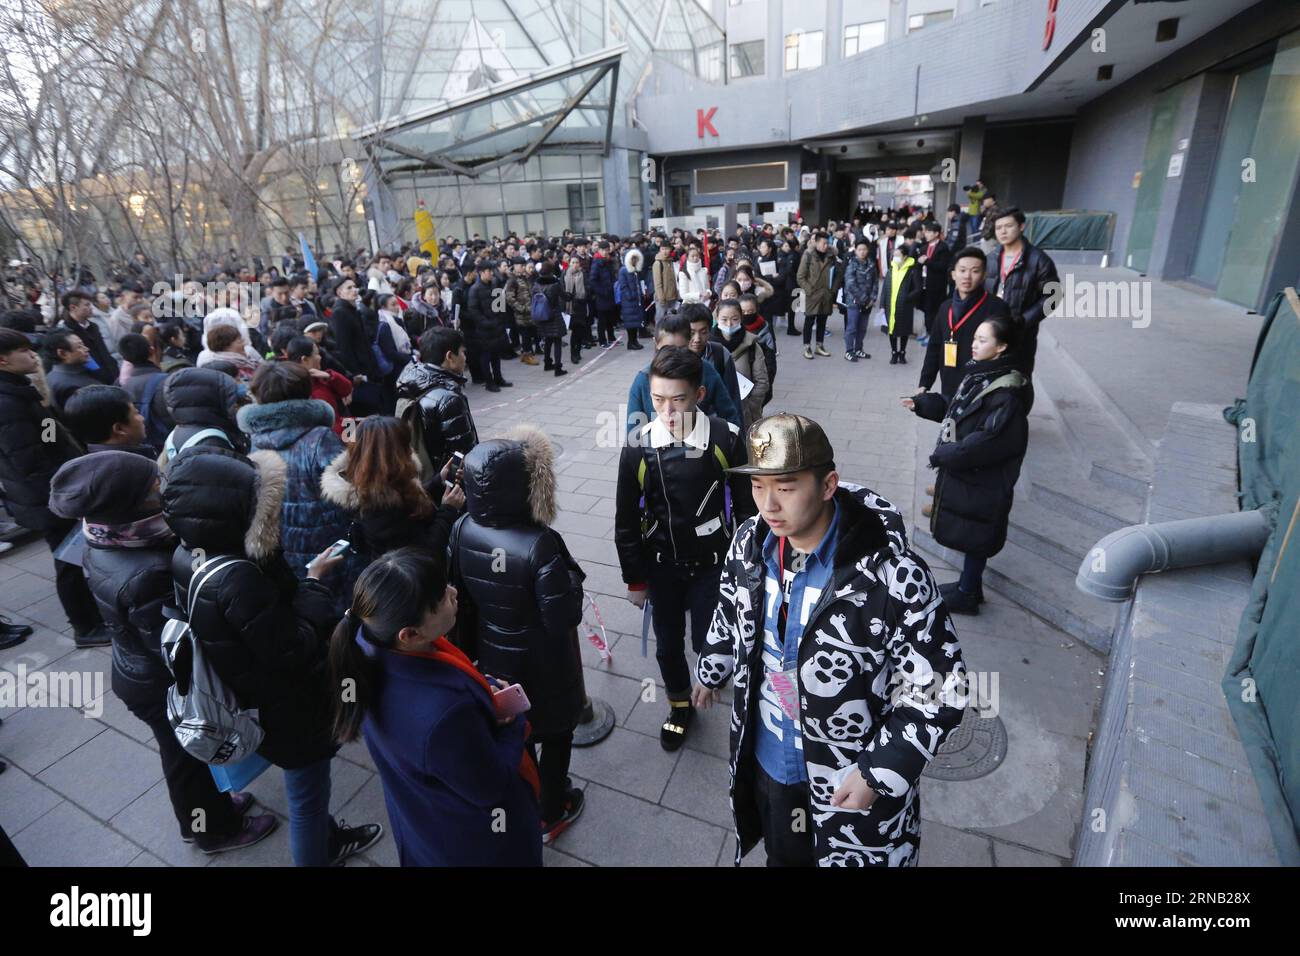 Candidates queue to enter the examination hall at Beijing Film Academy (BFA) in Beijing, capital of China, Feb. 15, 2016. The annual entrance exam of China s art colleges including BFA, the Central Academy of Drama and the Communication University of China started simultaneously on Monday. Over 7,600 applicants for BFA s performance institute will take part in the exam to vie for 45 vacancies in the institute. Some Chinese young people regarded studying in an art college as a shortcut to become famous in recent years. )(mcg) CHINA-BEIJING-ART PROFESSIONAL-EXAM (CN) ShenxBohan PUBLICATIONxNOTxI Stock Photo